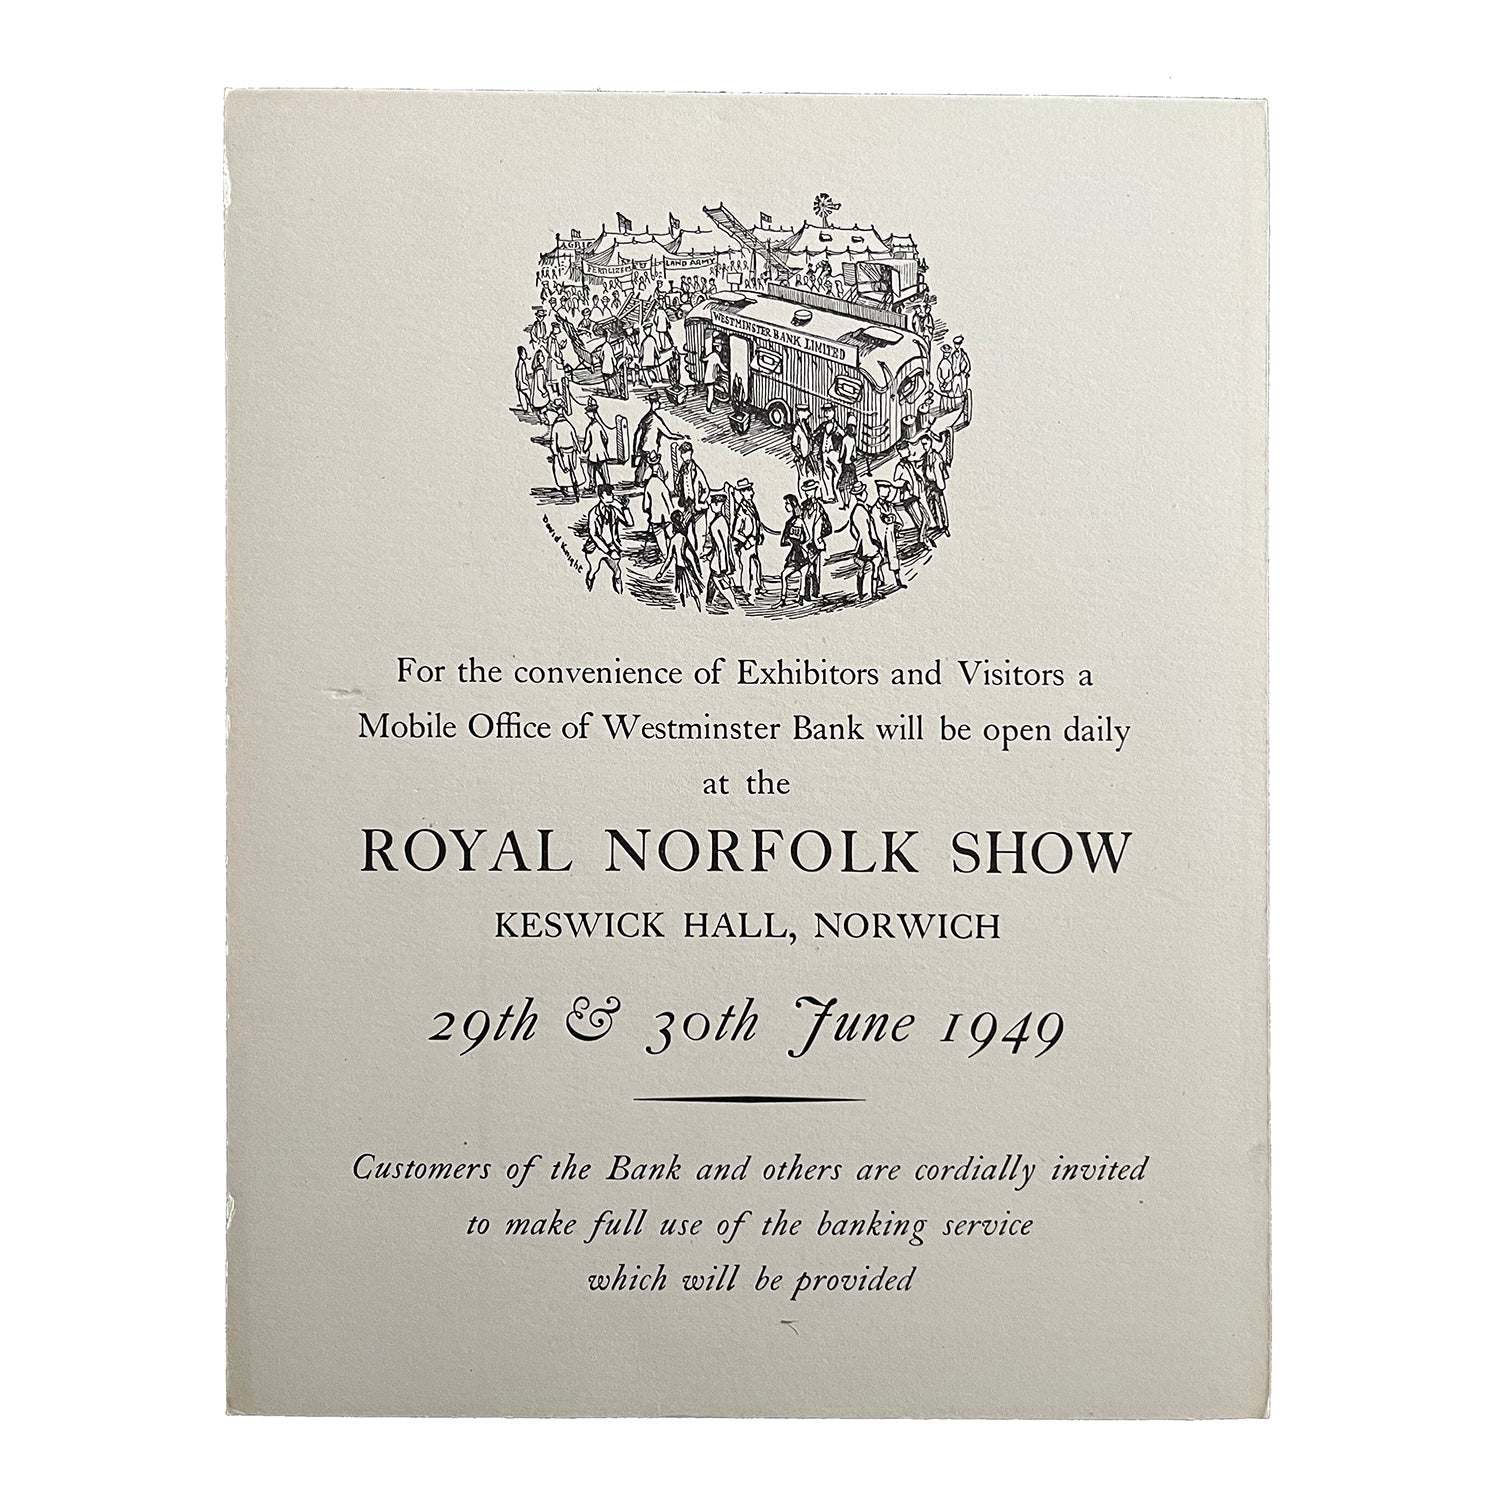 hanging card exhibitor notice published by the Westminster Bank for display at the Royal Norfolk Show, 1949